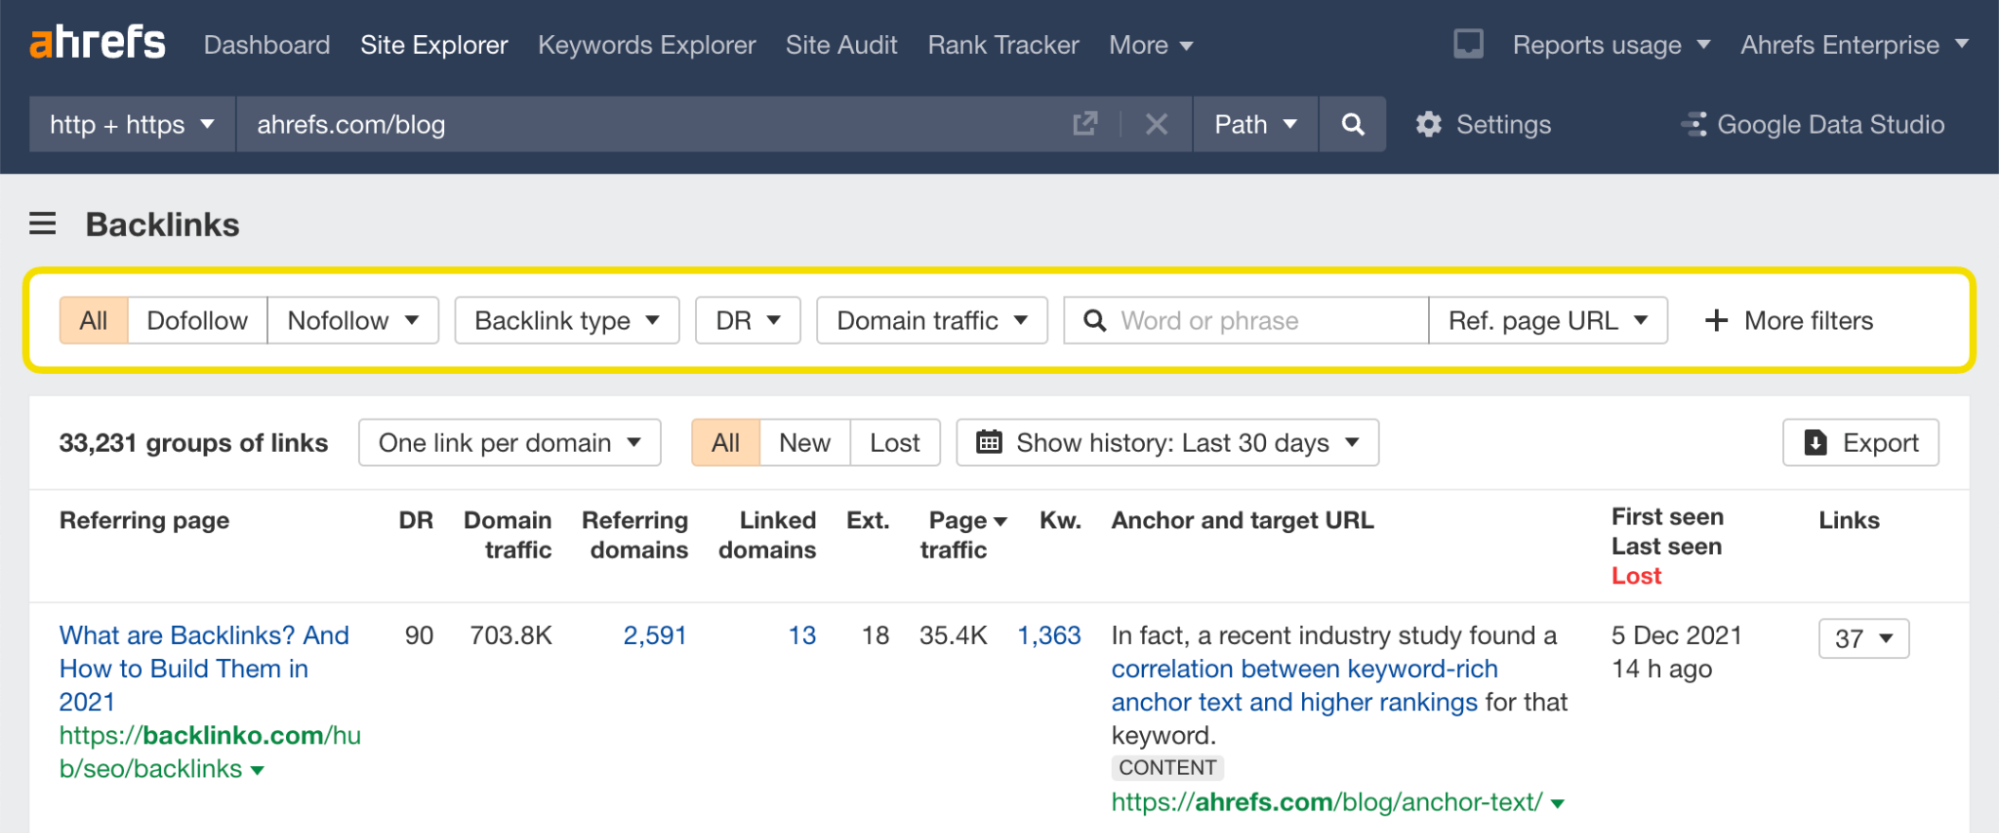 Ahrefs "Backlinks" overview table